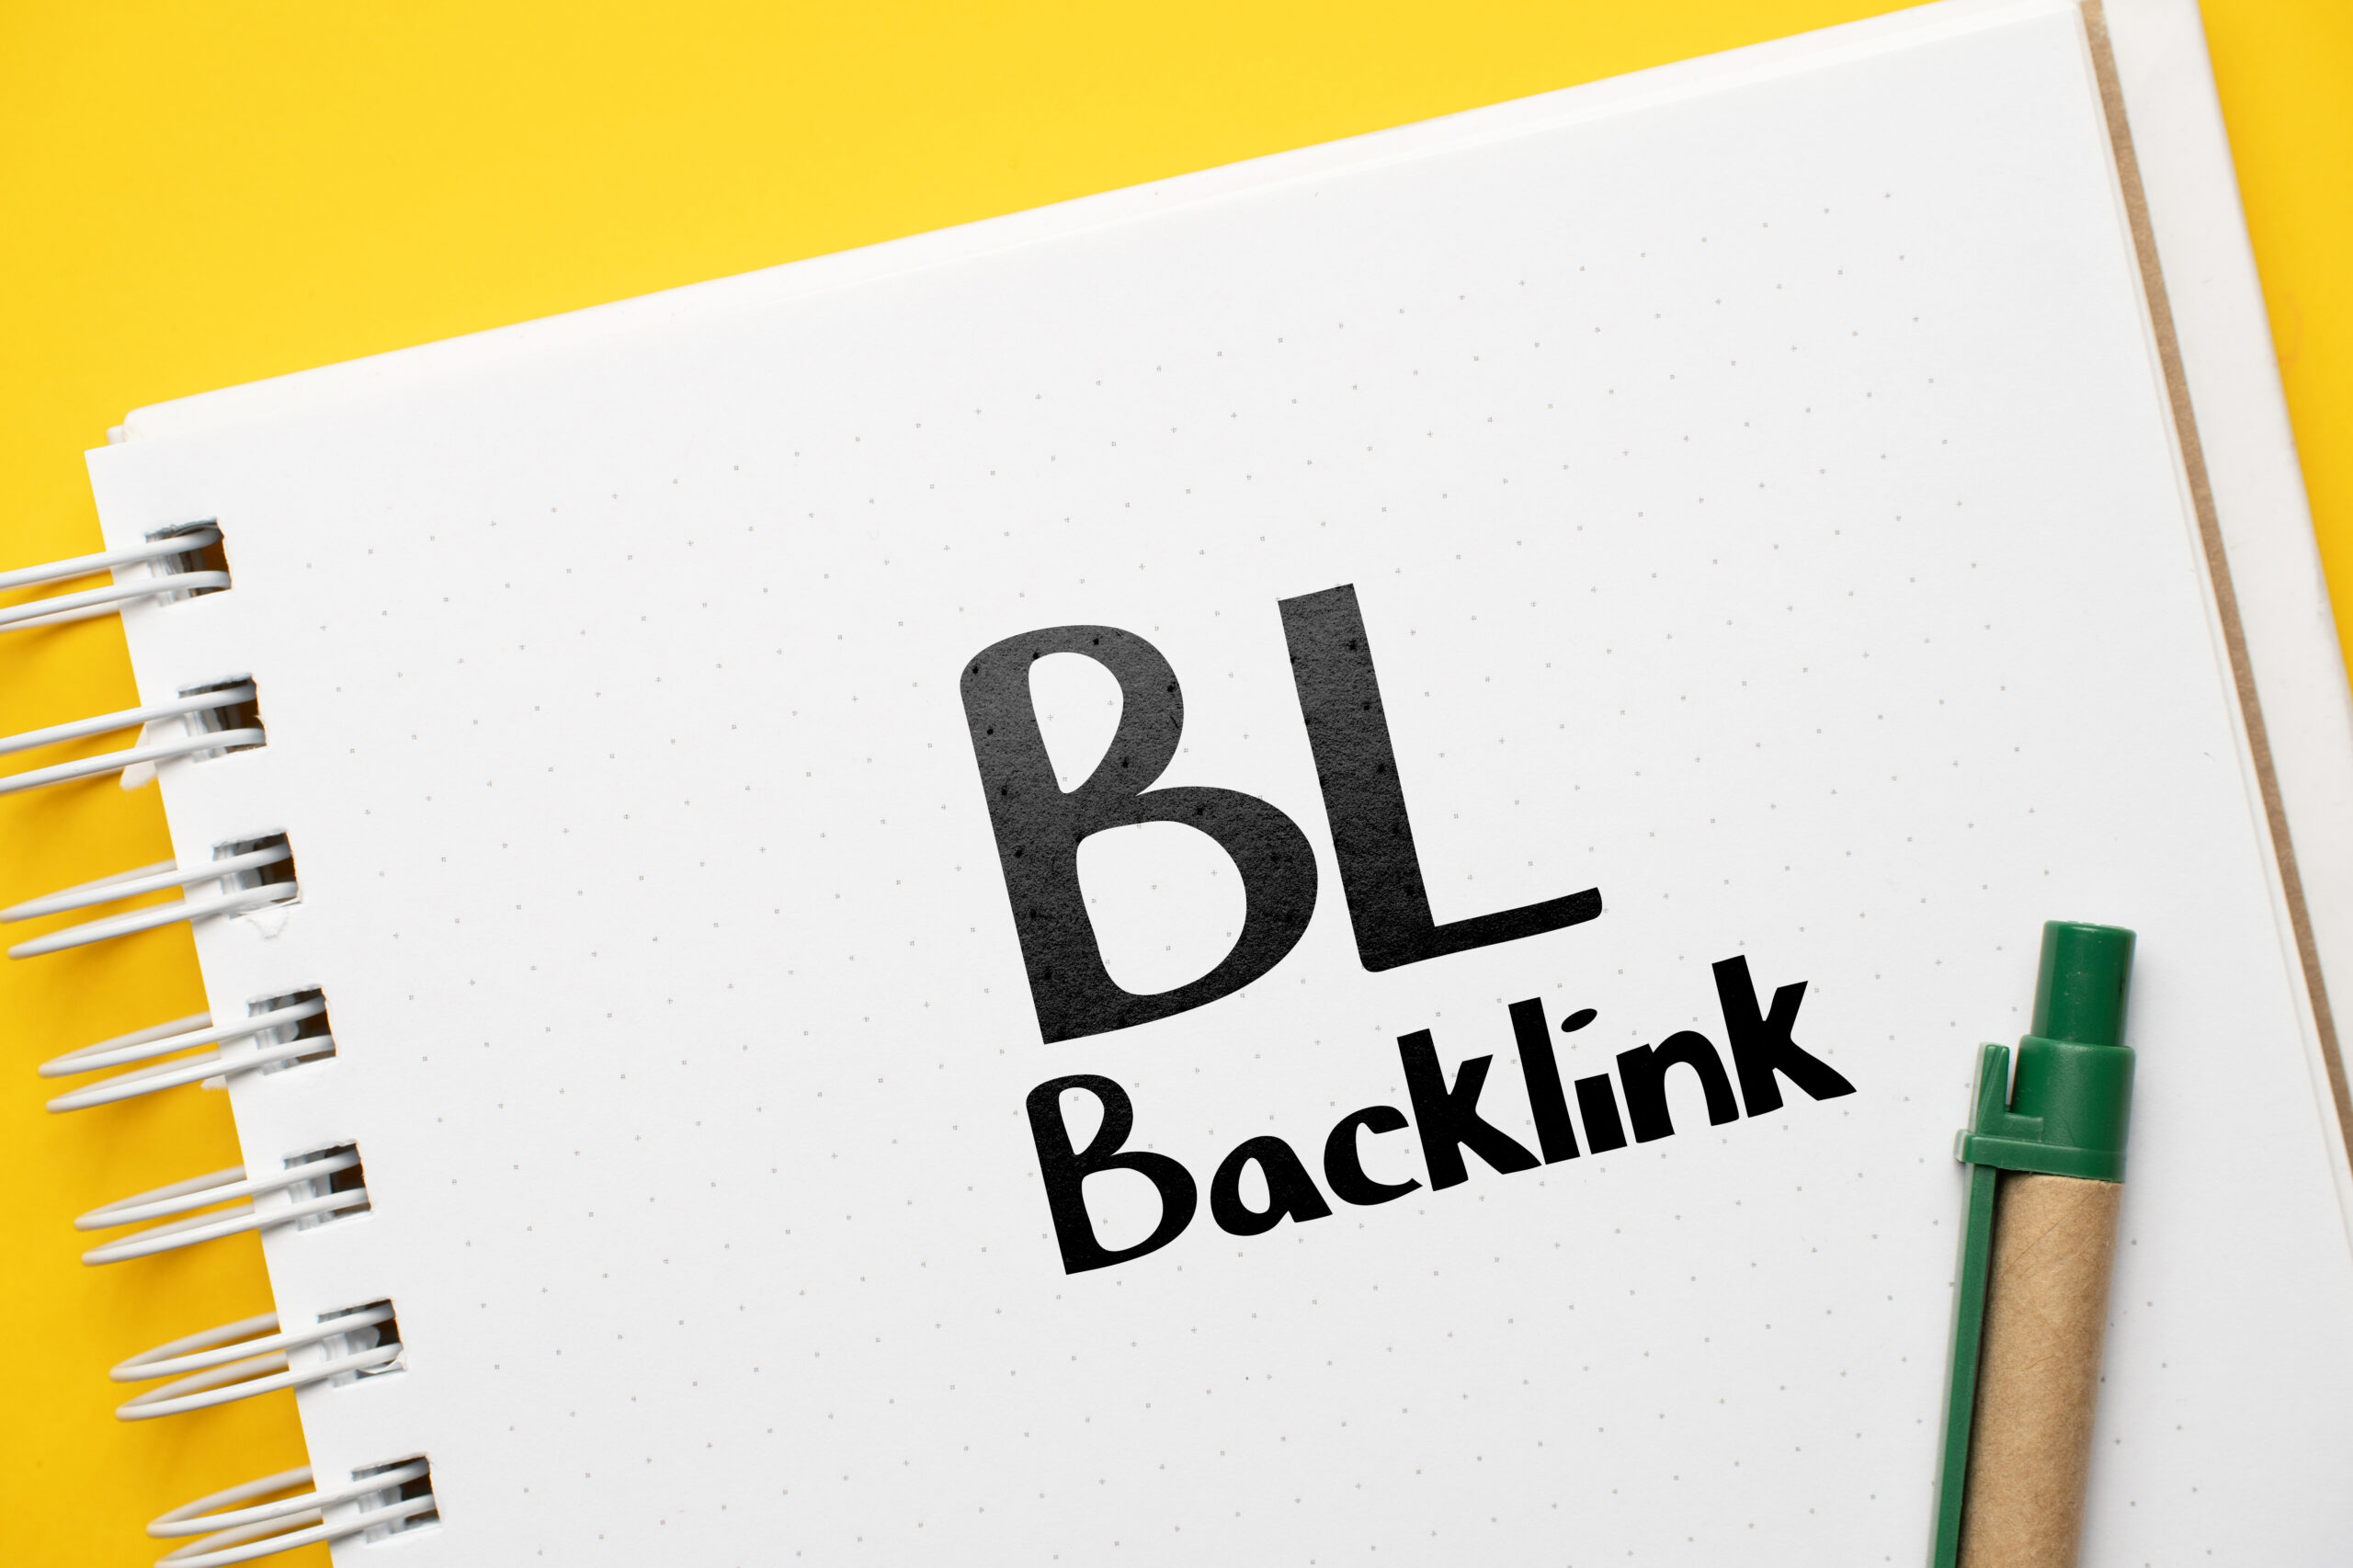 A open note book with a pen next to it. On the open, the letters "BL" are written in marker with the word "backlink" below it.